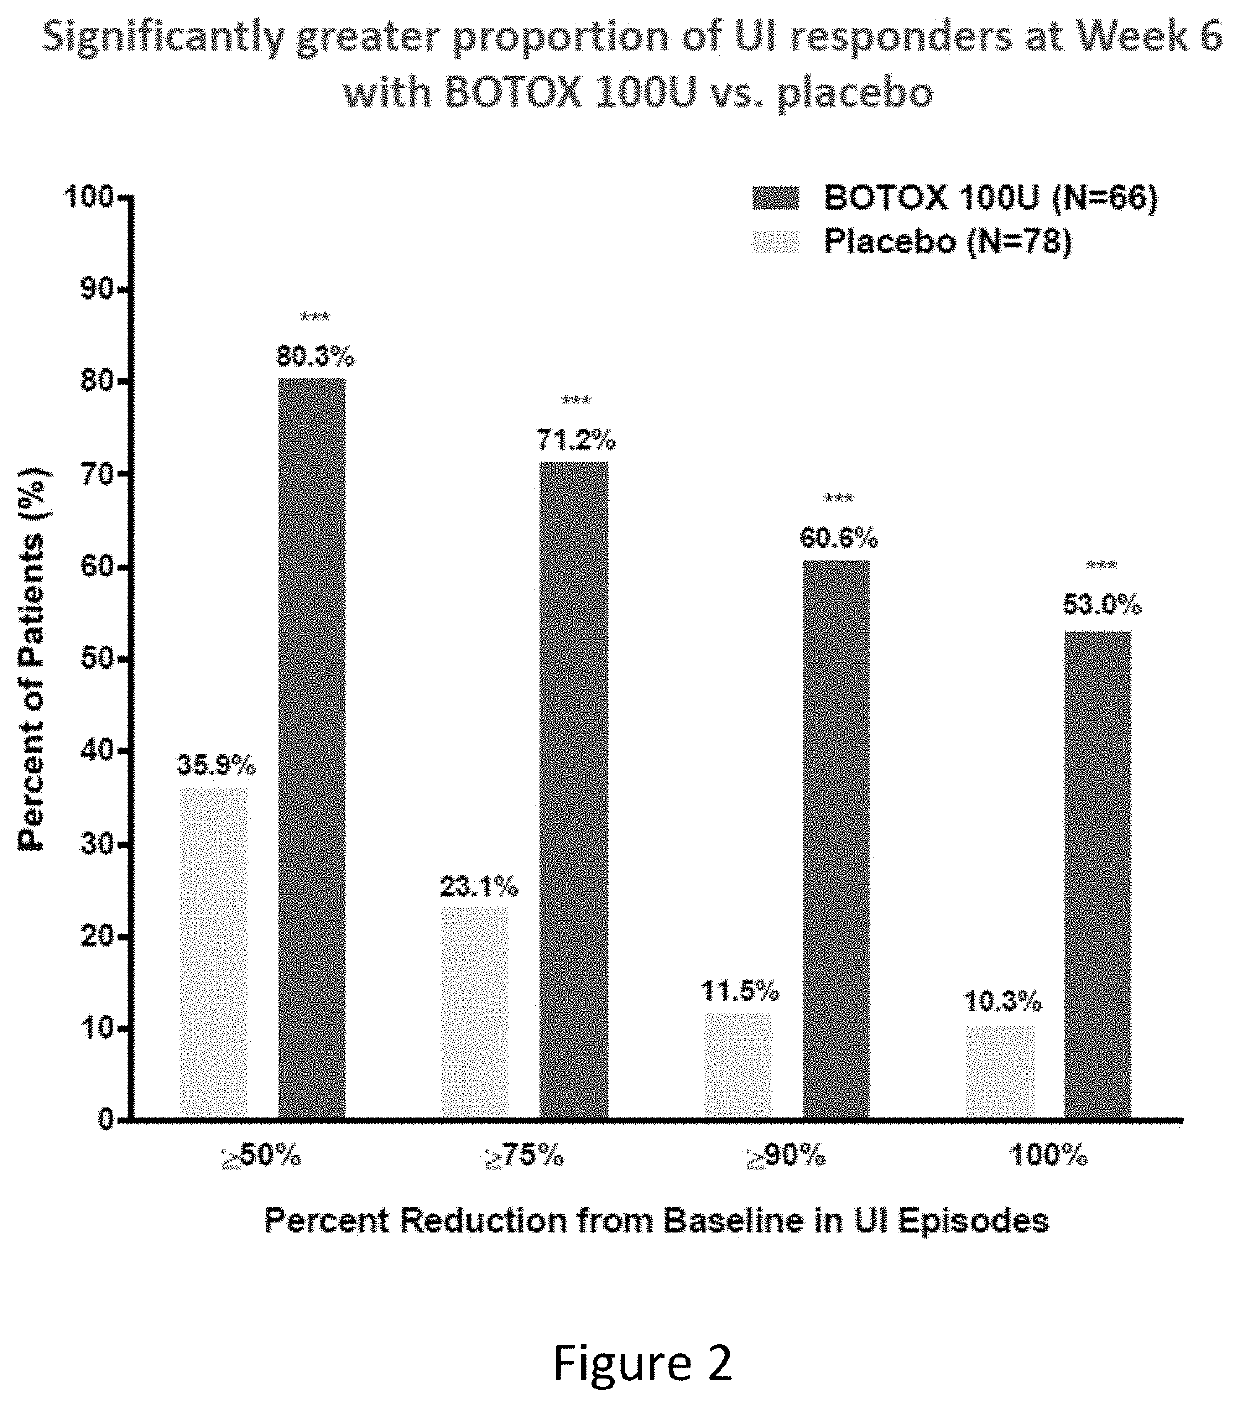 Botulinum toxin administration for treatment of neurogenic detrusor overactivity associated urinary incontinence